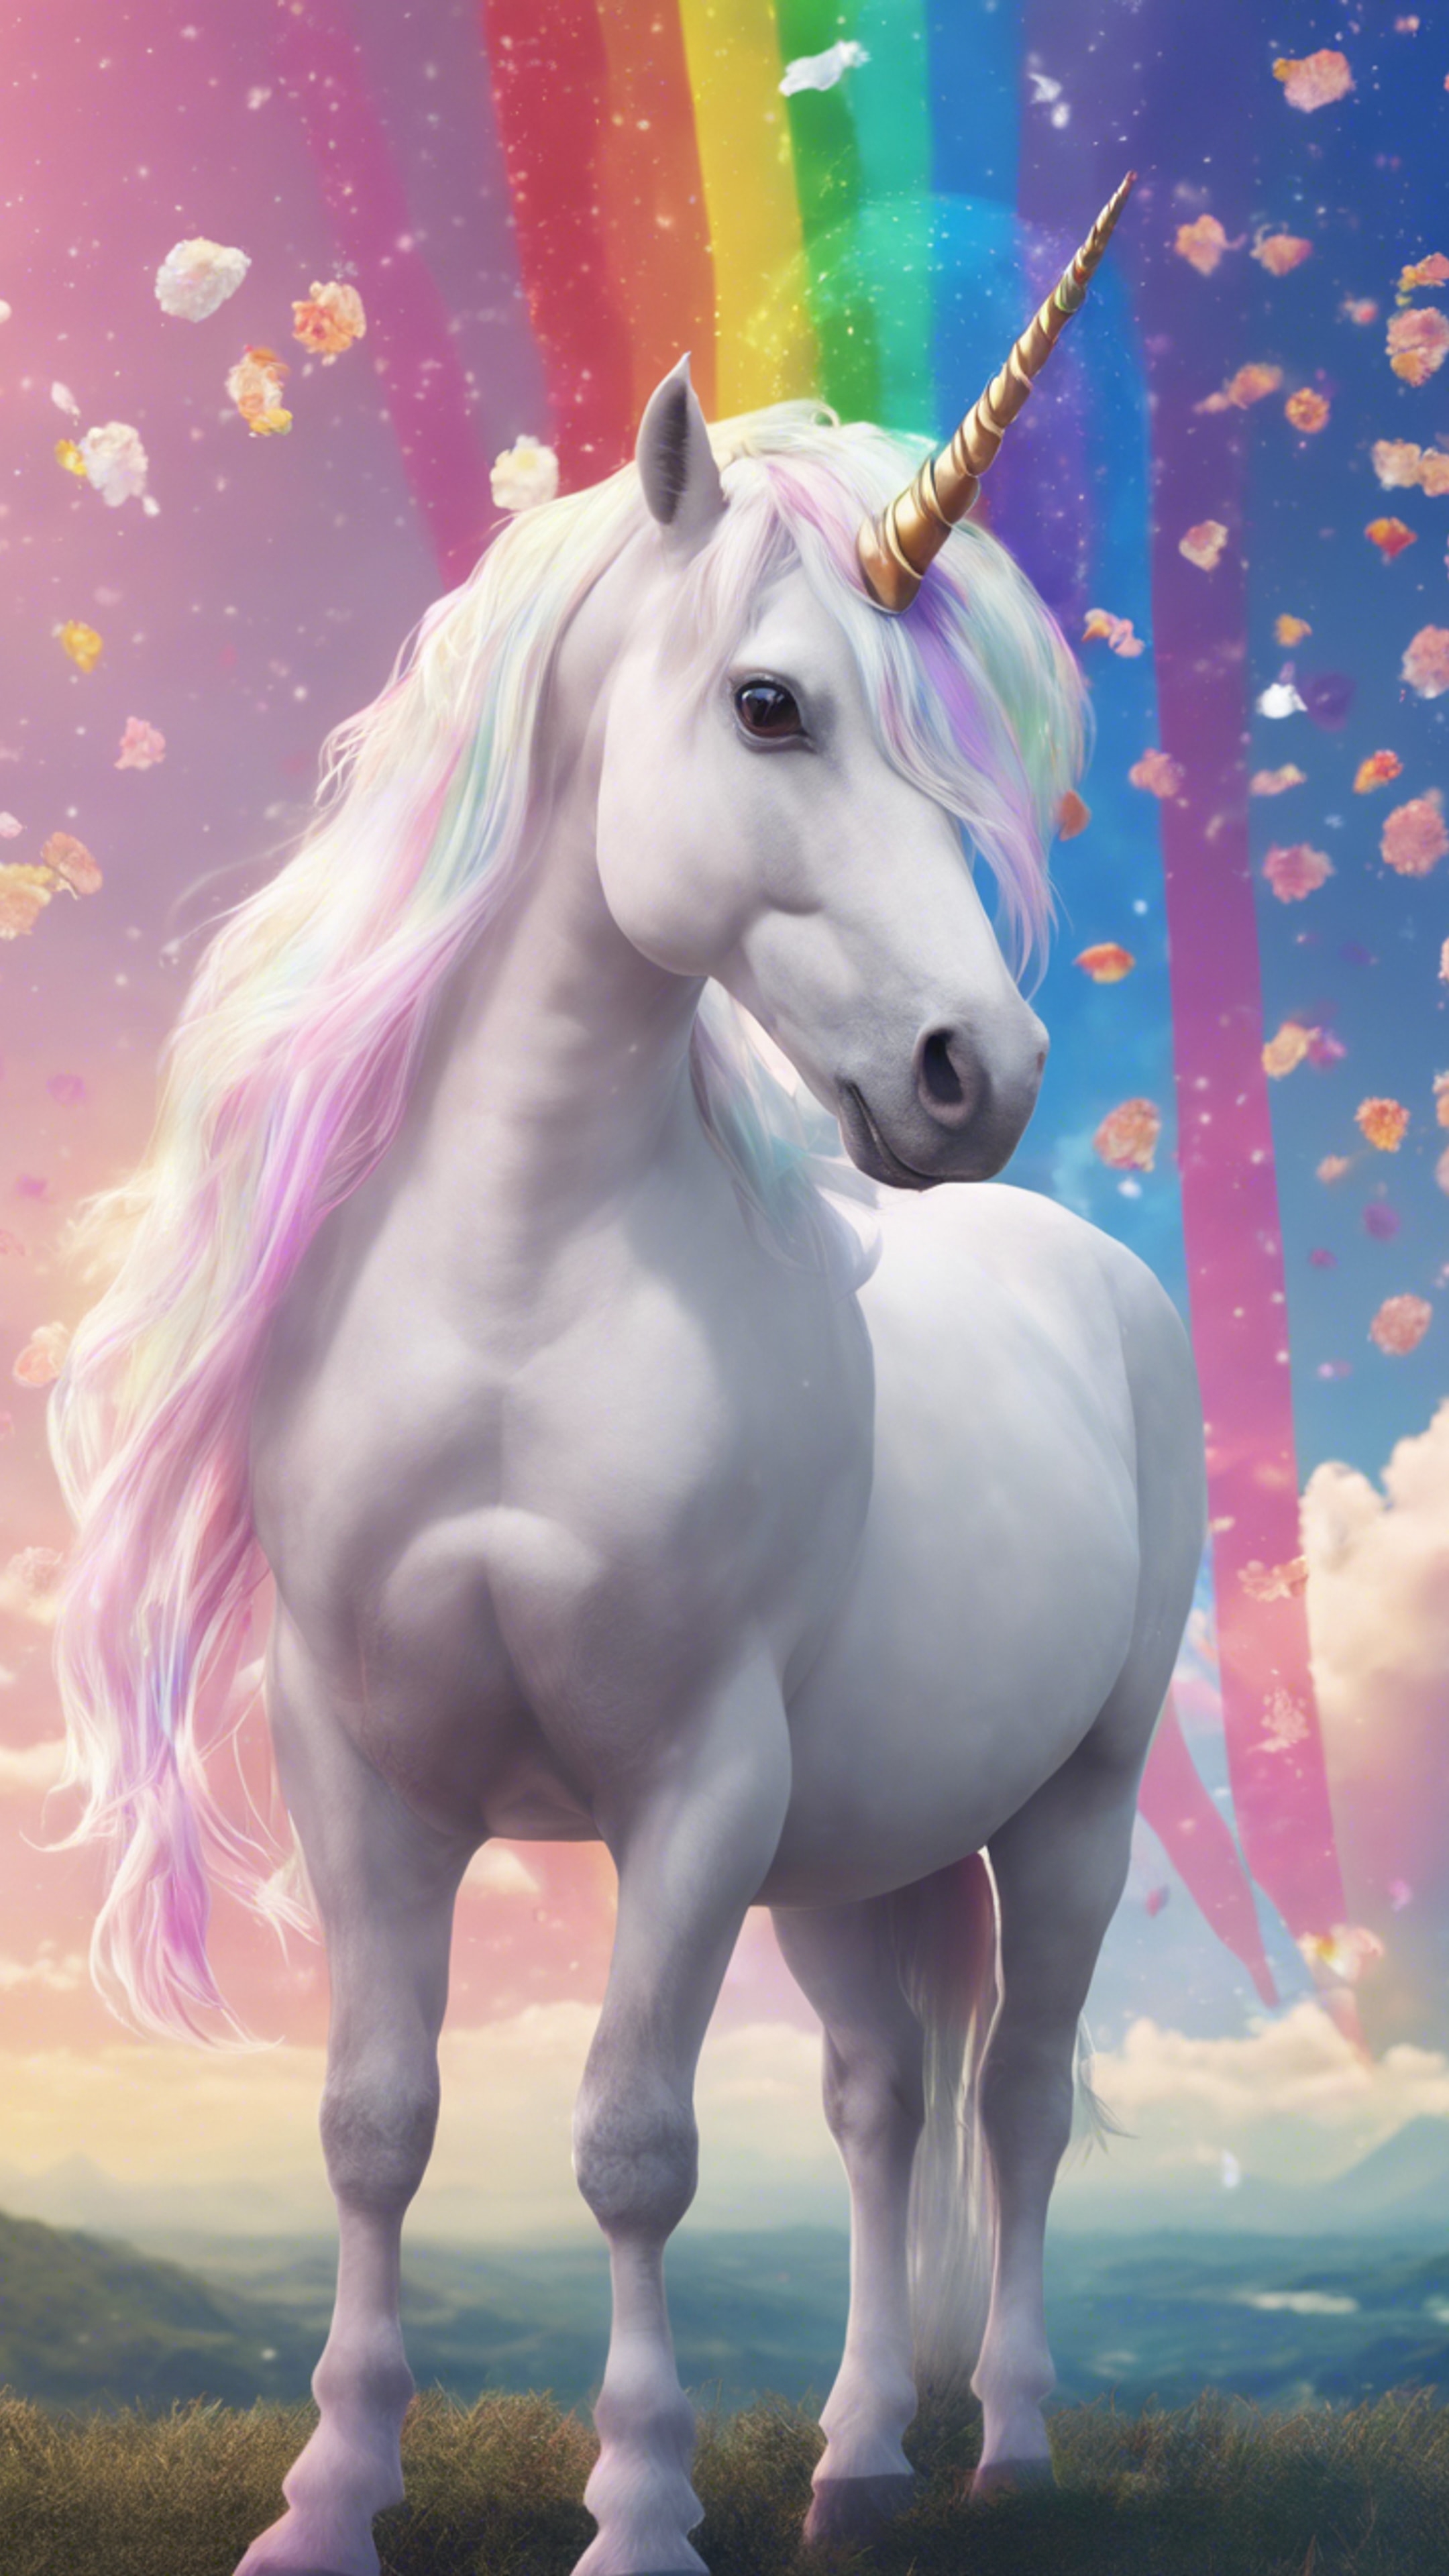 A white unicorn with rainbow-colored mane in a kawaii styled anime background. Fond d'écran[3fcd035c52a54abd9a77]